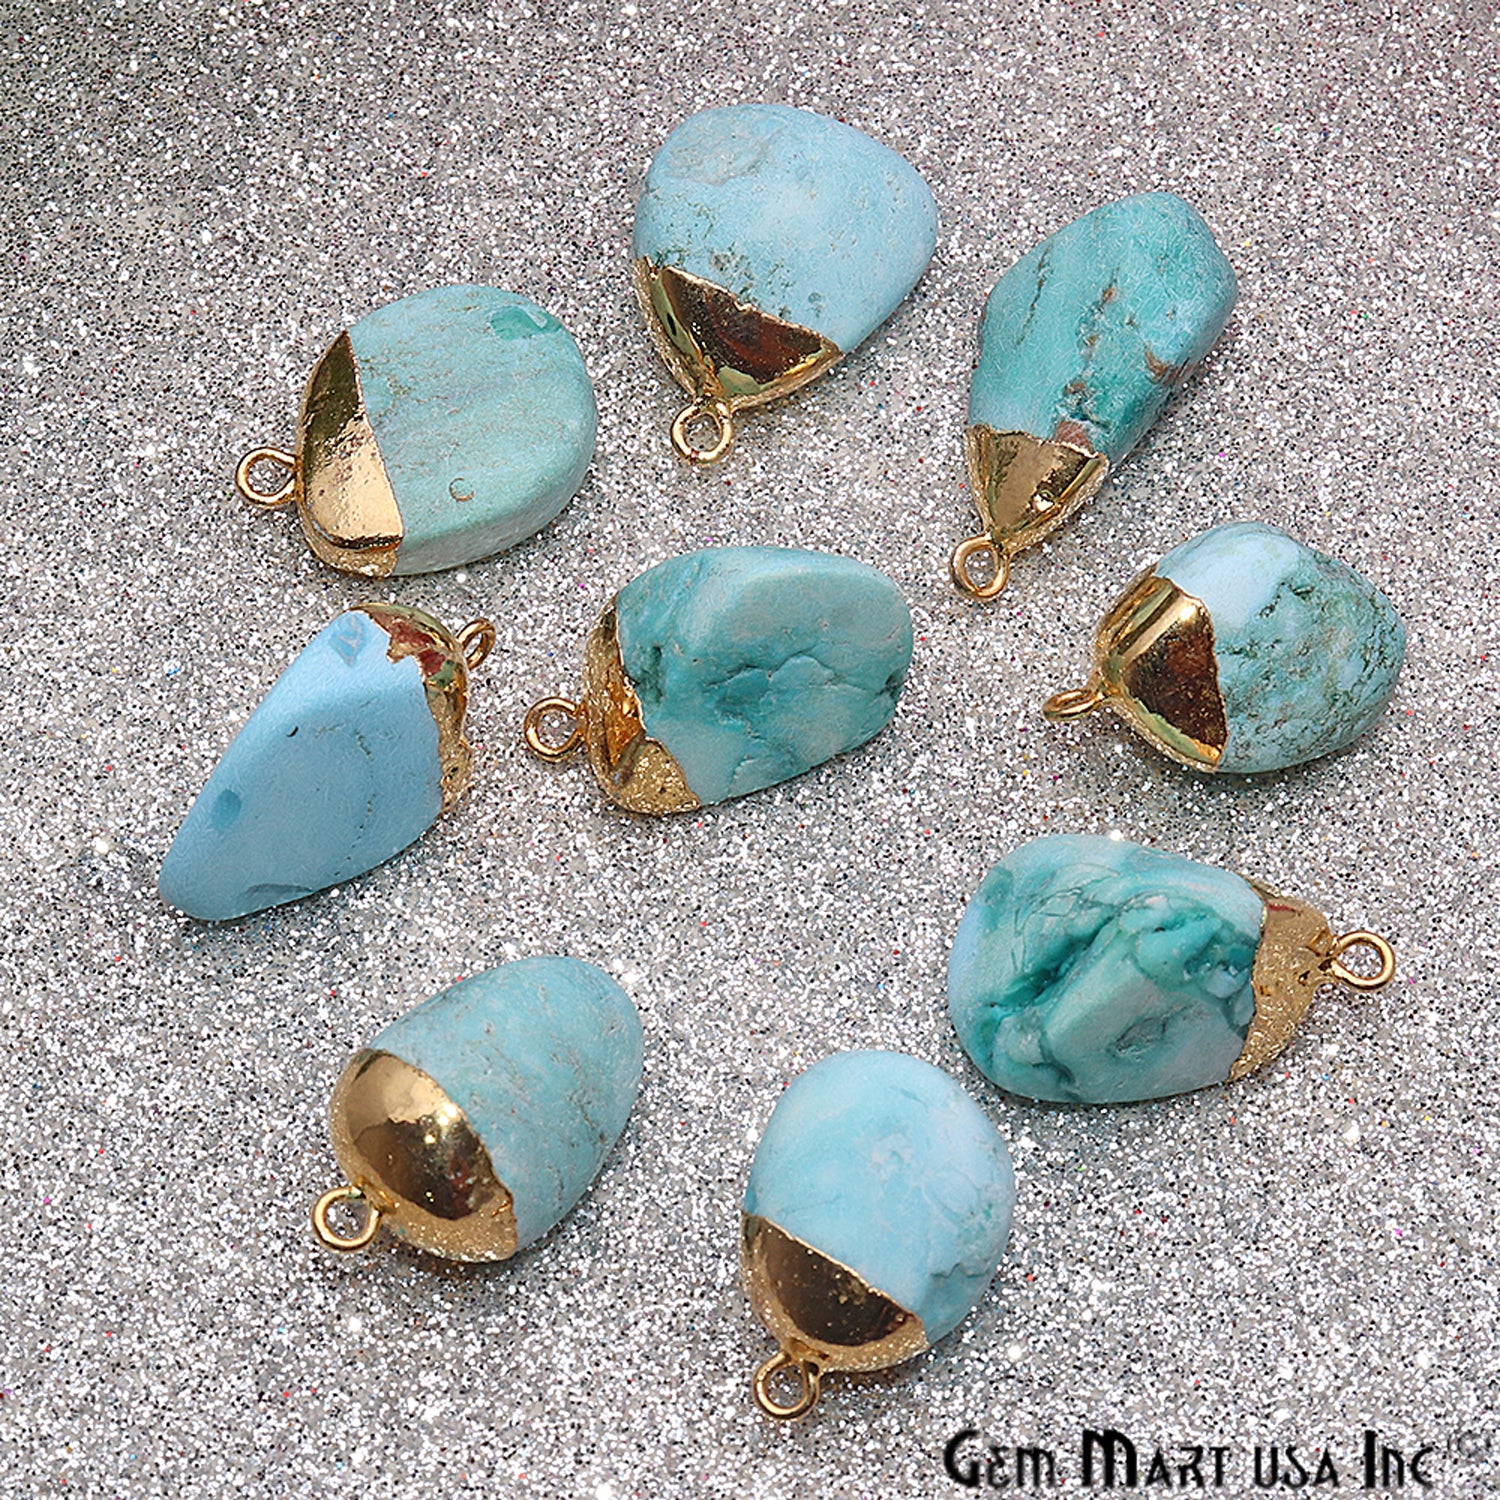 Amazonite Gemstone Frosted Matte Bead 22x14mm Gold Edged Single Bail Connector - GemMartUSA